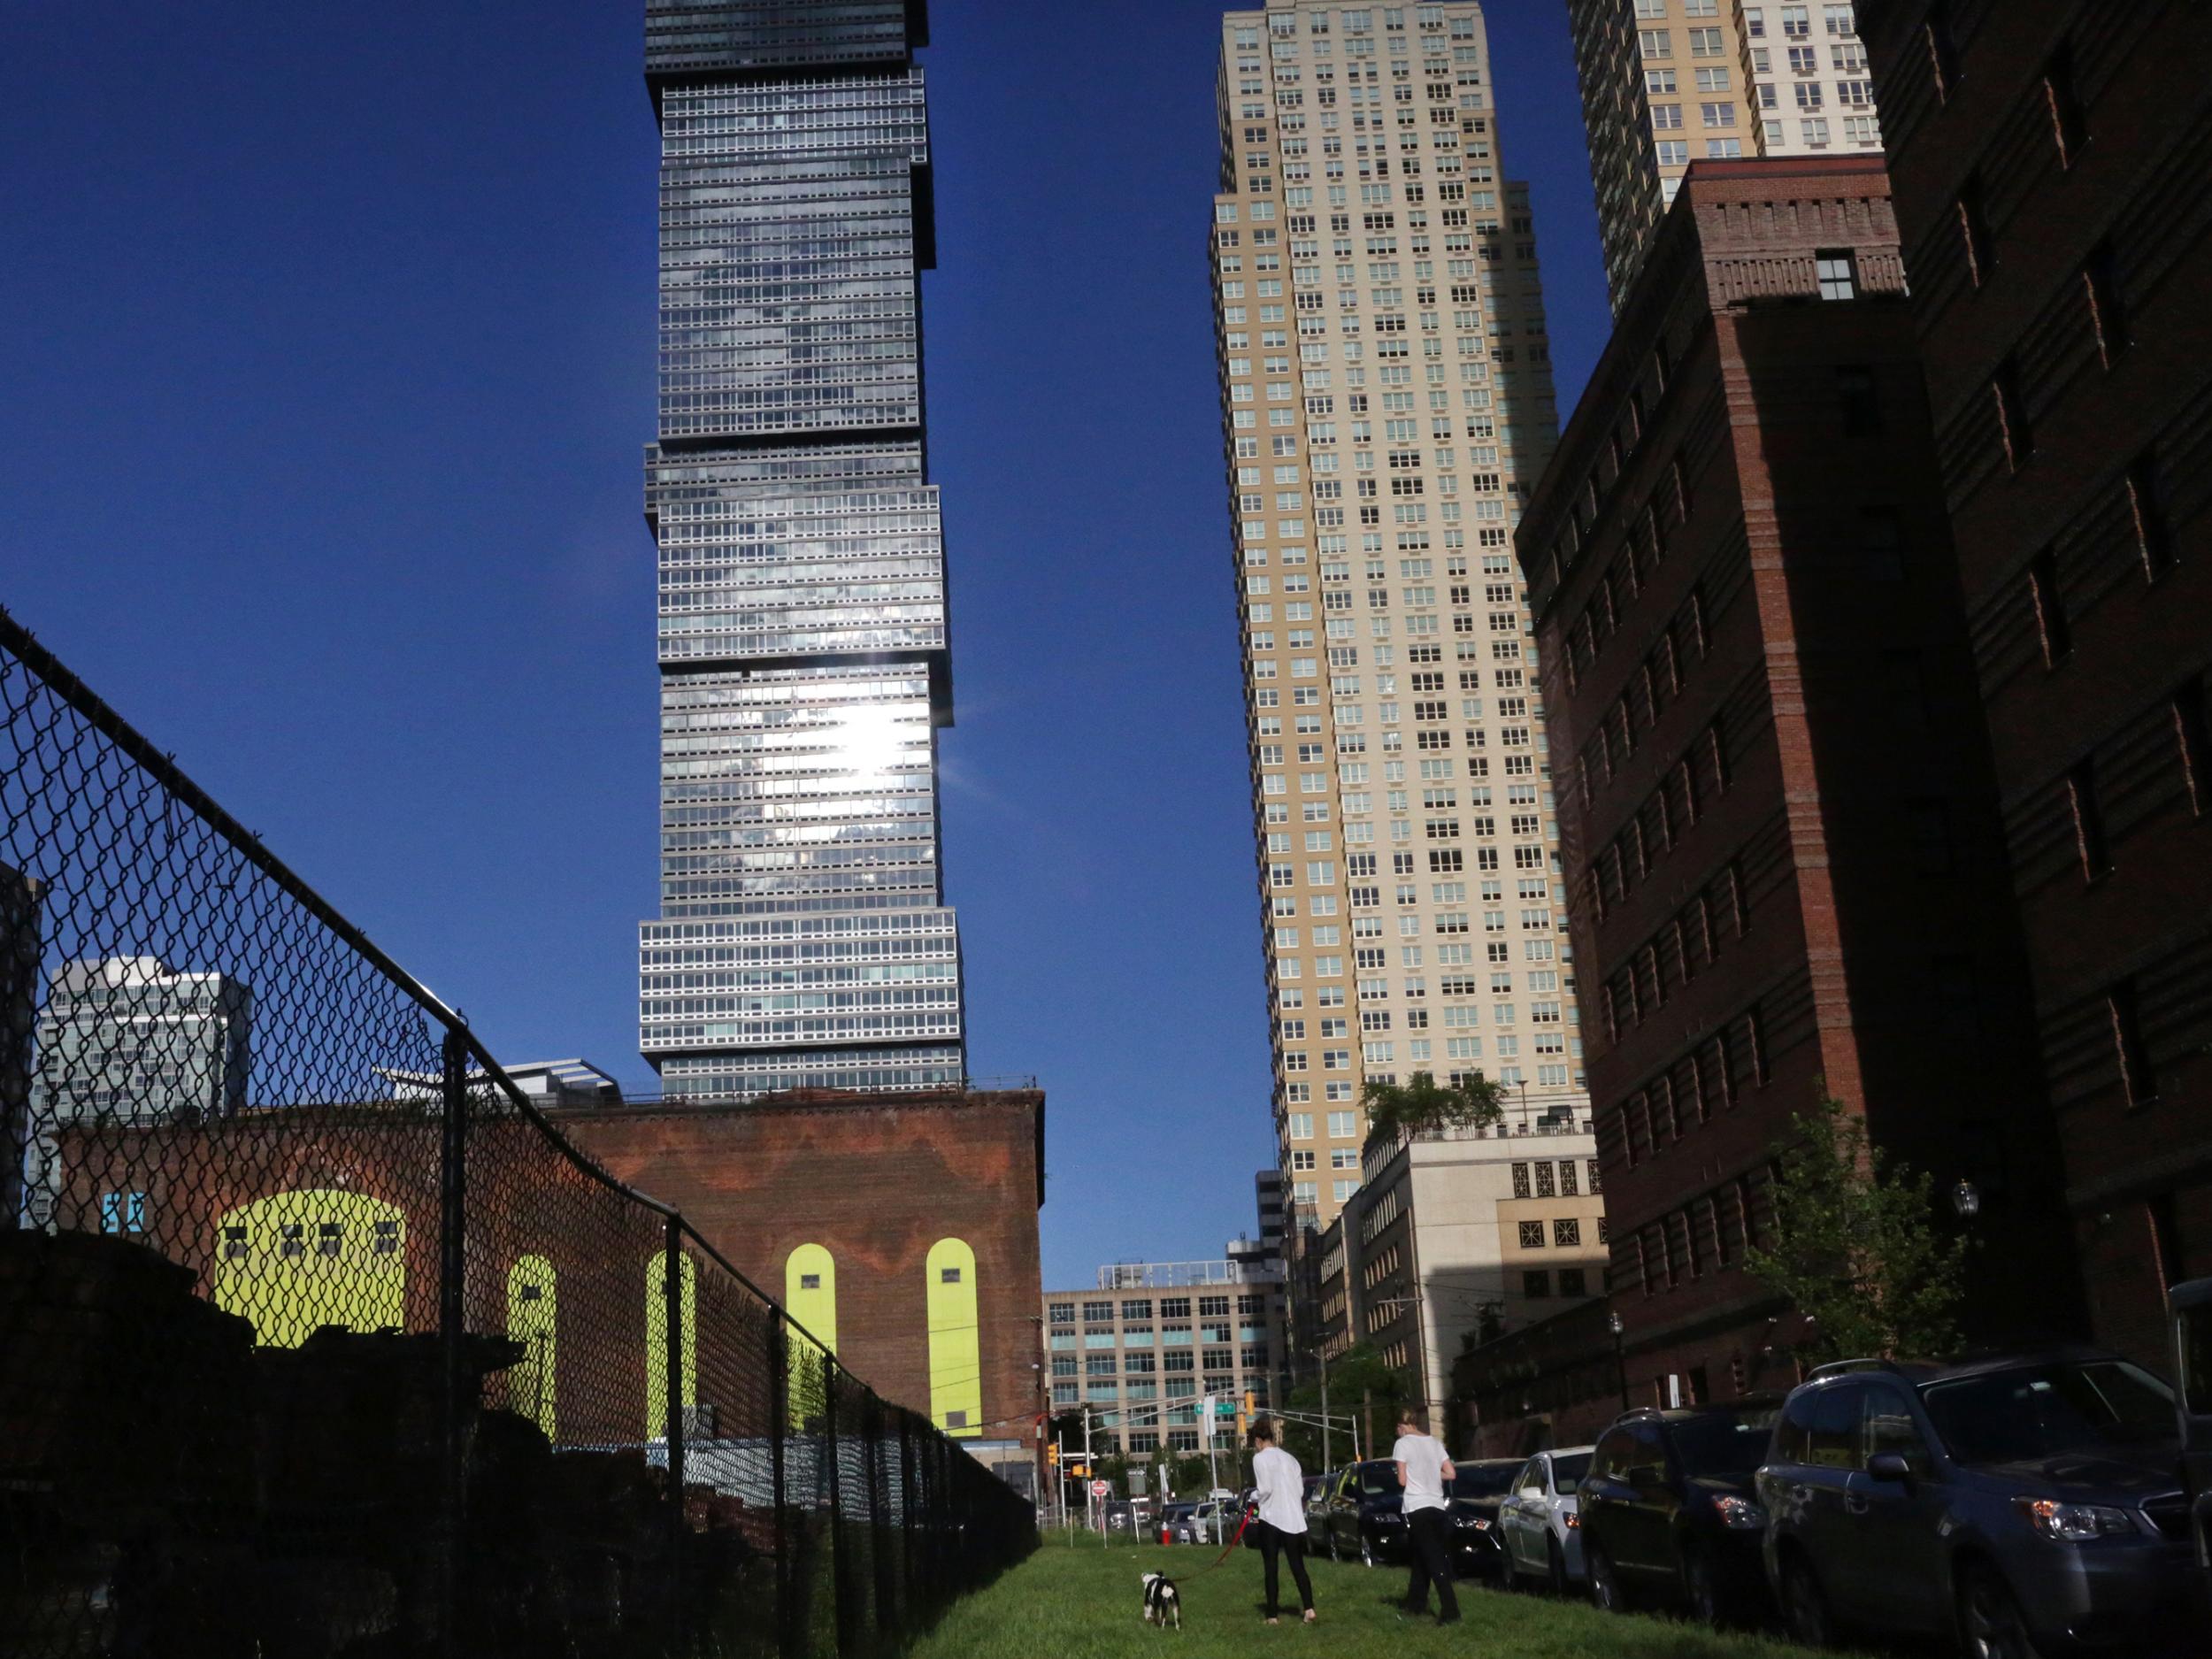 The developers of 65 Bay St. in Jersey City, the tower on the right, used an investor visa program to obtain $50 million in low-cost financing